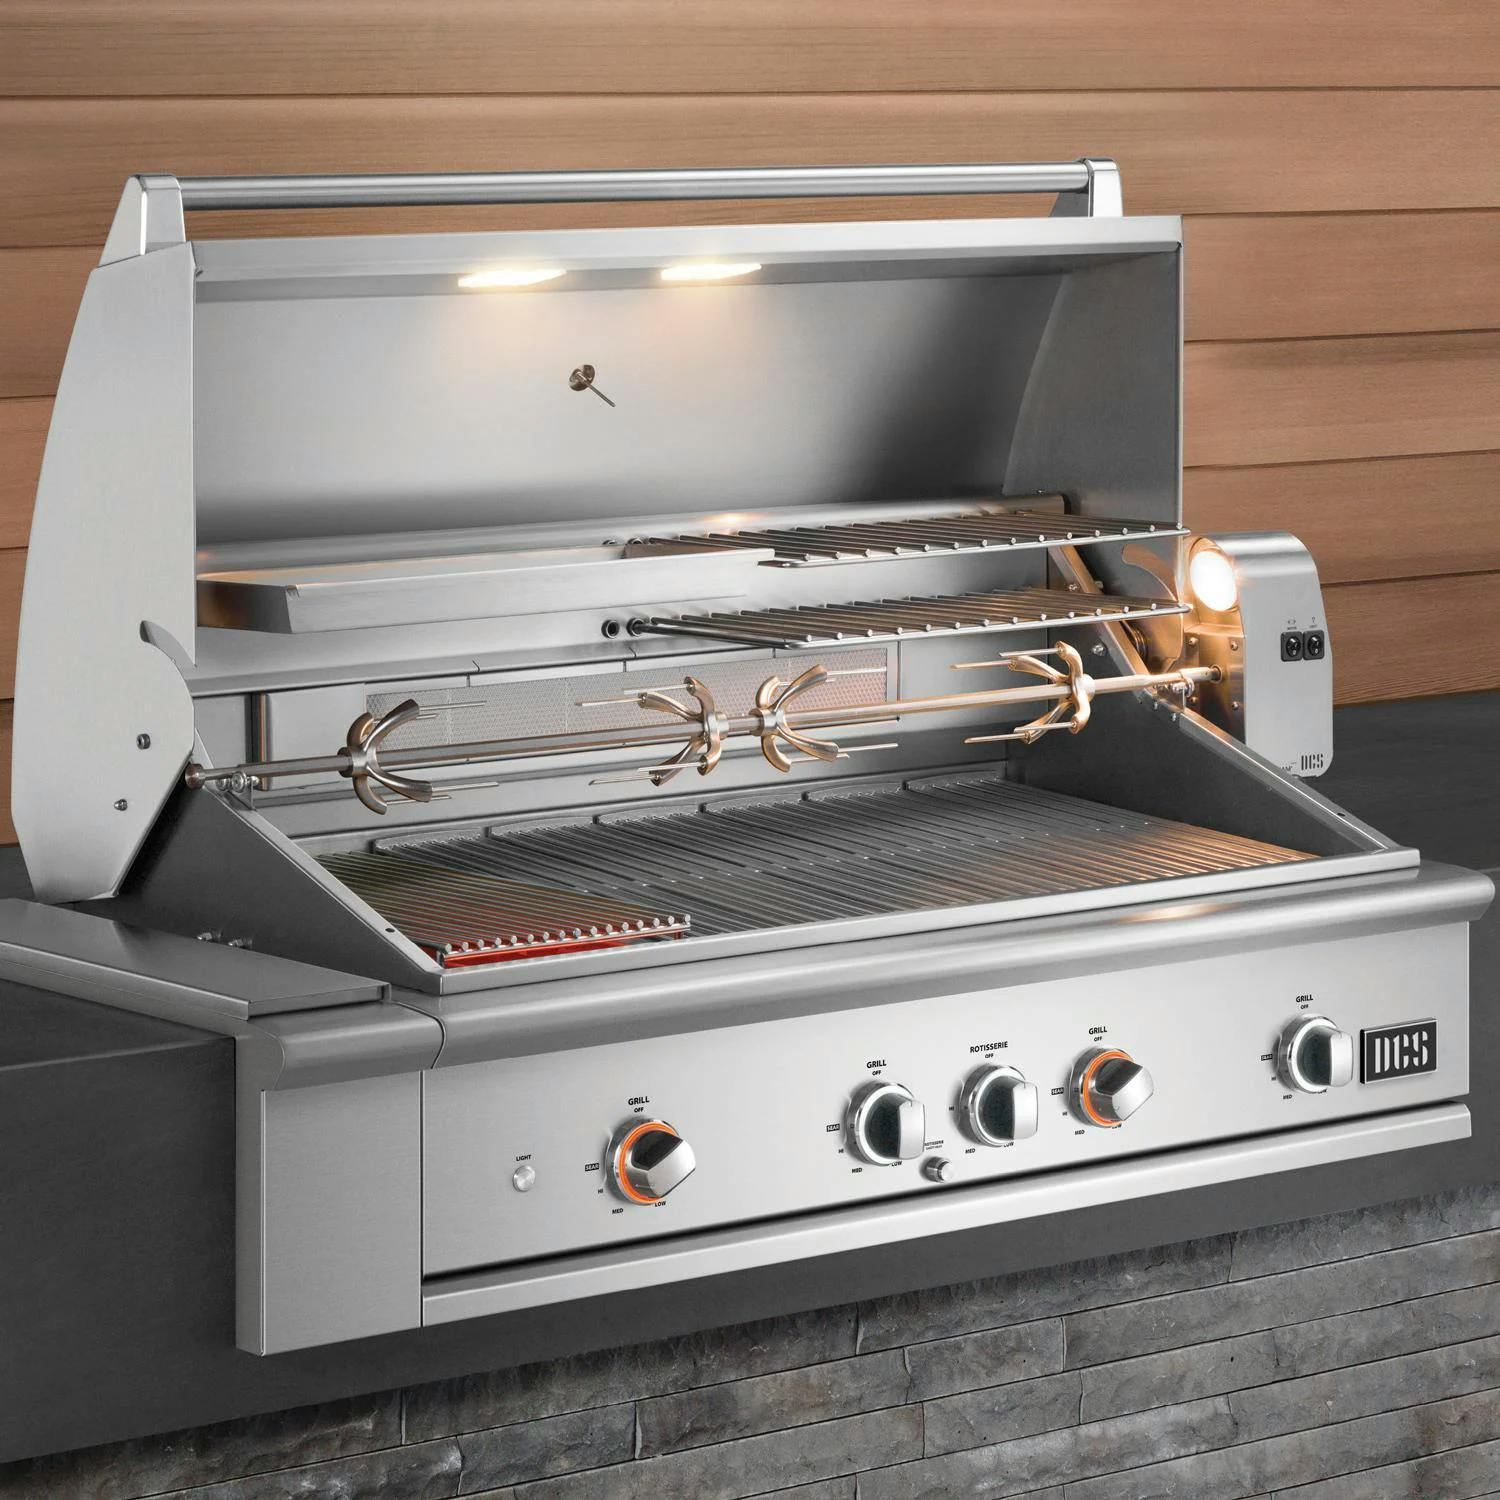 DCS Series 9 Evolution Built-In Gas Grill with Rotisserie · 48 in. · Propane